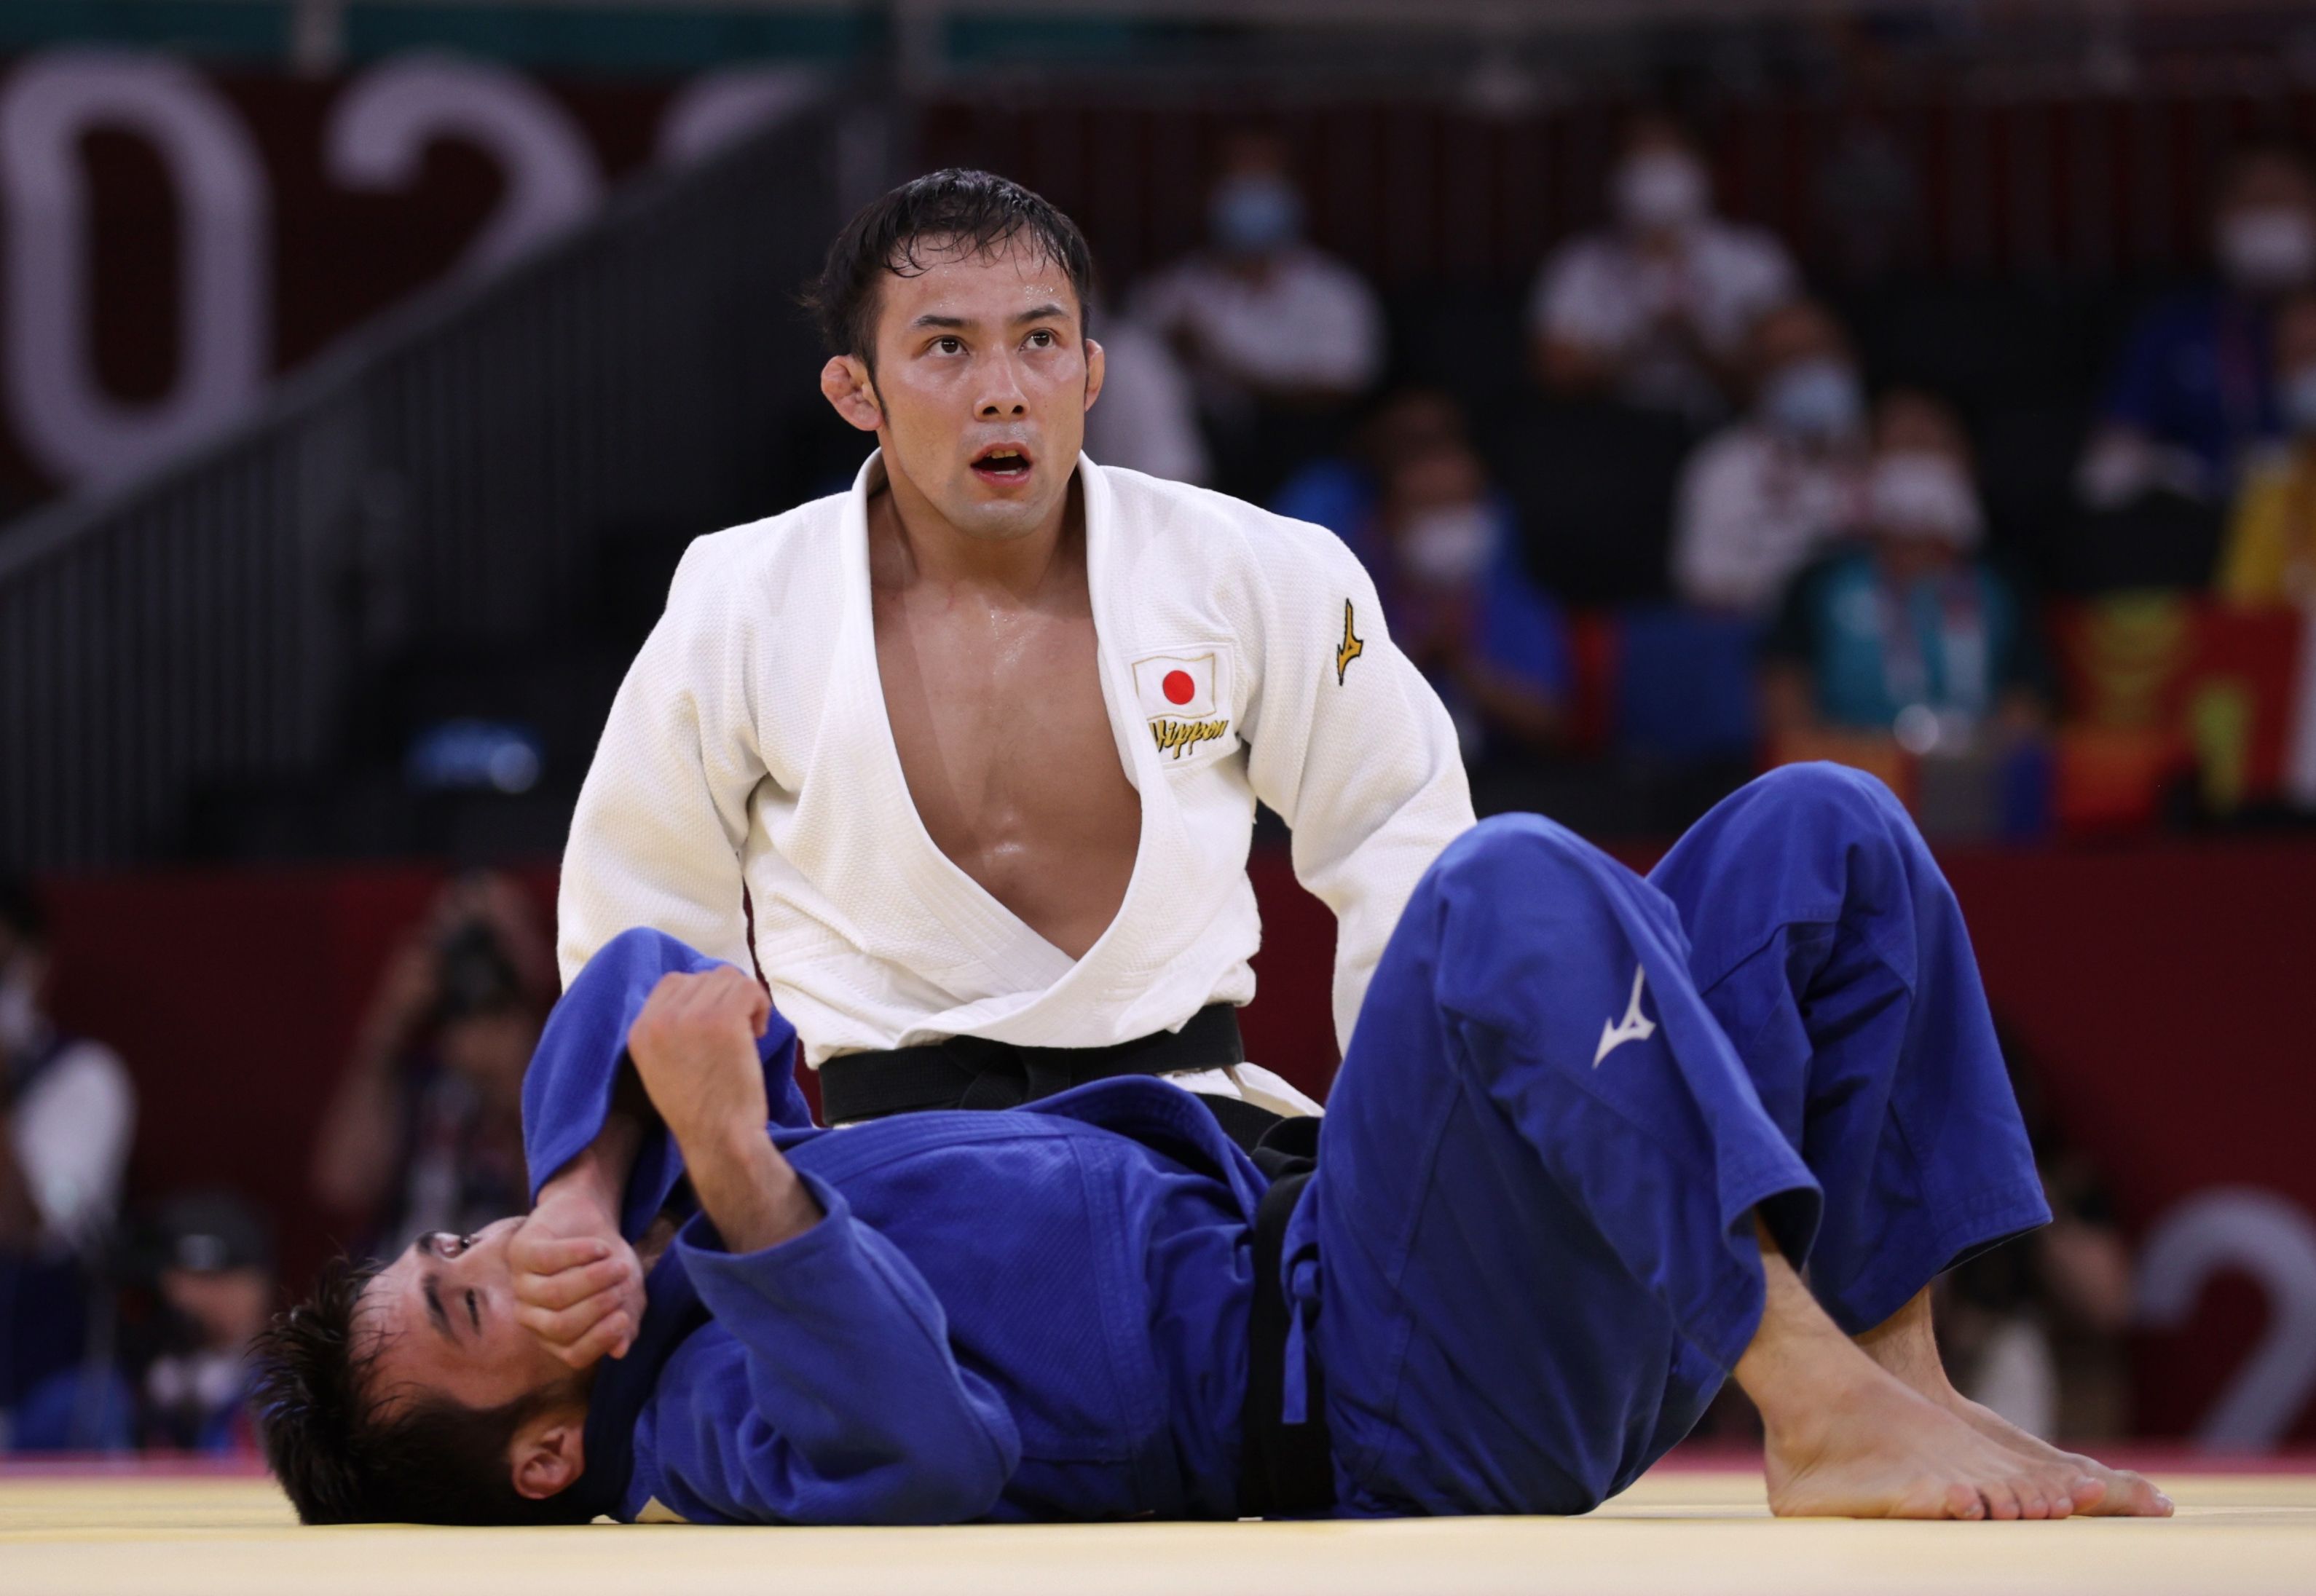 JudoTakato wins Japan's first gold medal of the Tokyo Games Reuters